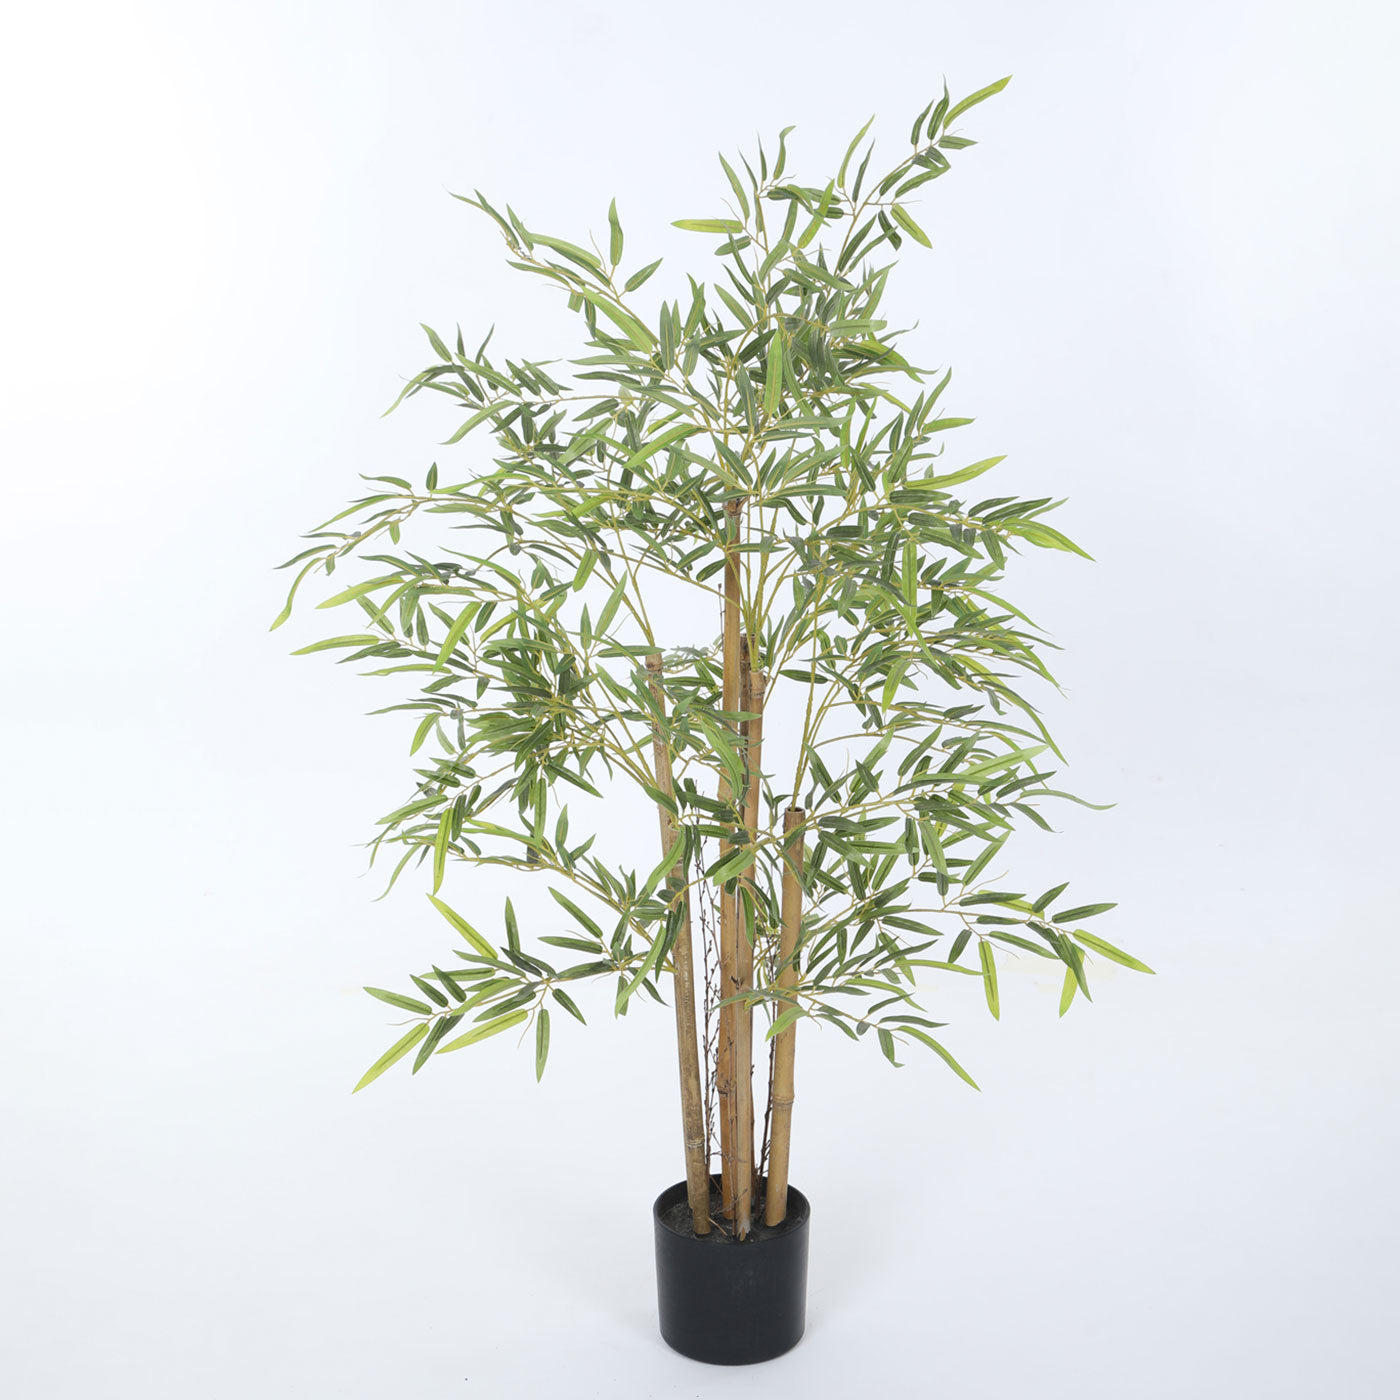 Artificial Green Bamboo Plant for Home Decor/Office Decor/Gifting | Natural Looking Indoor Plant (With Pot, 120 cm)